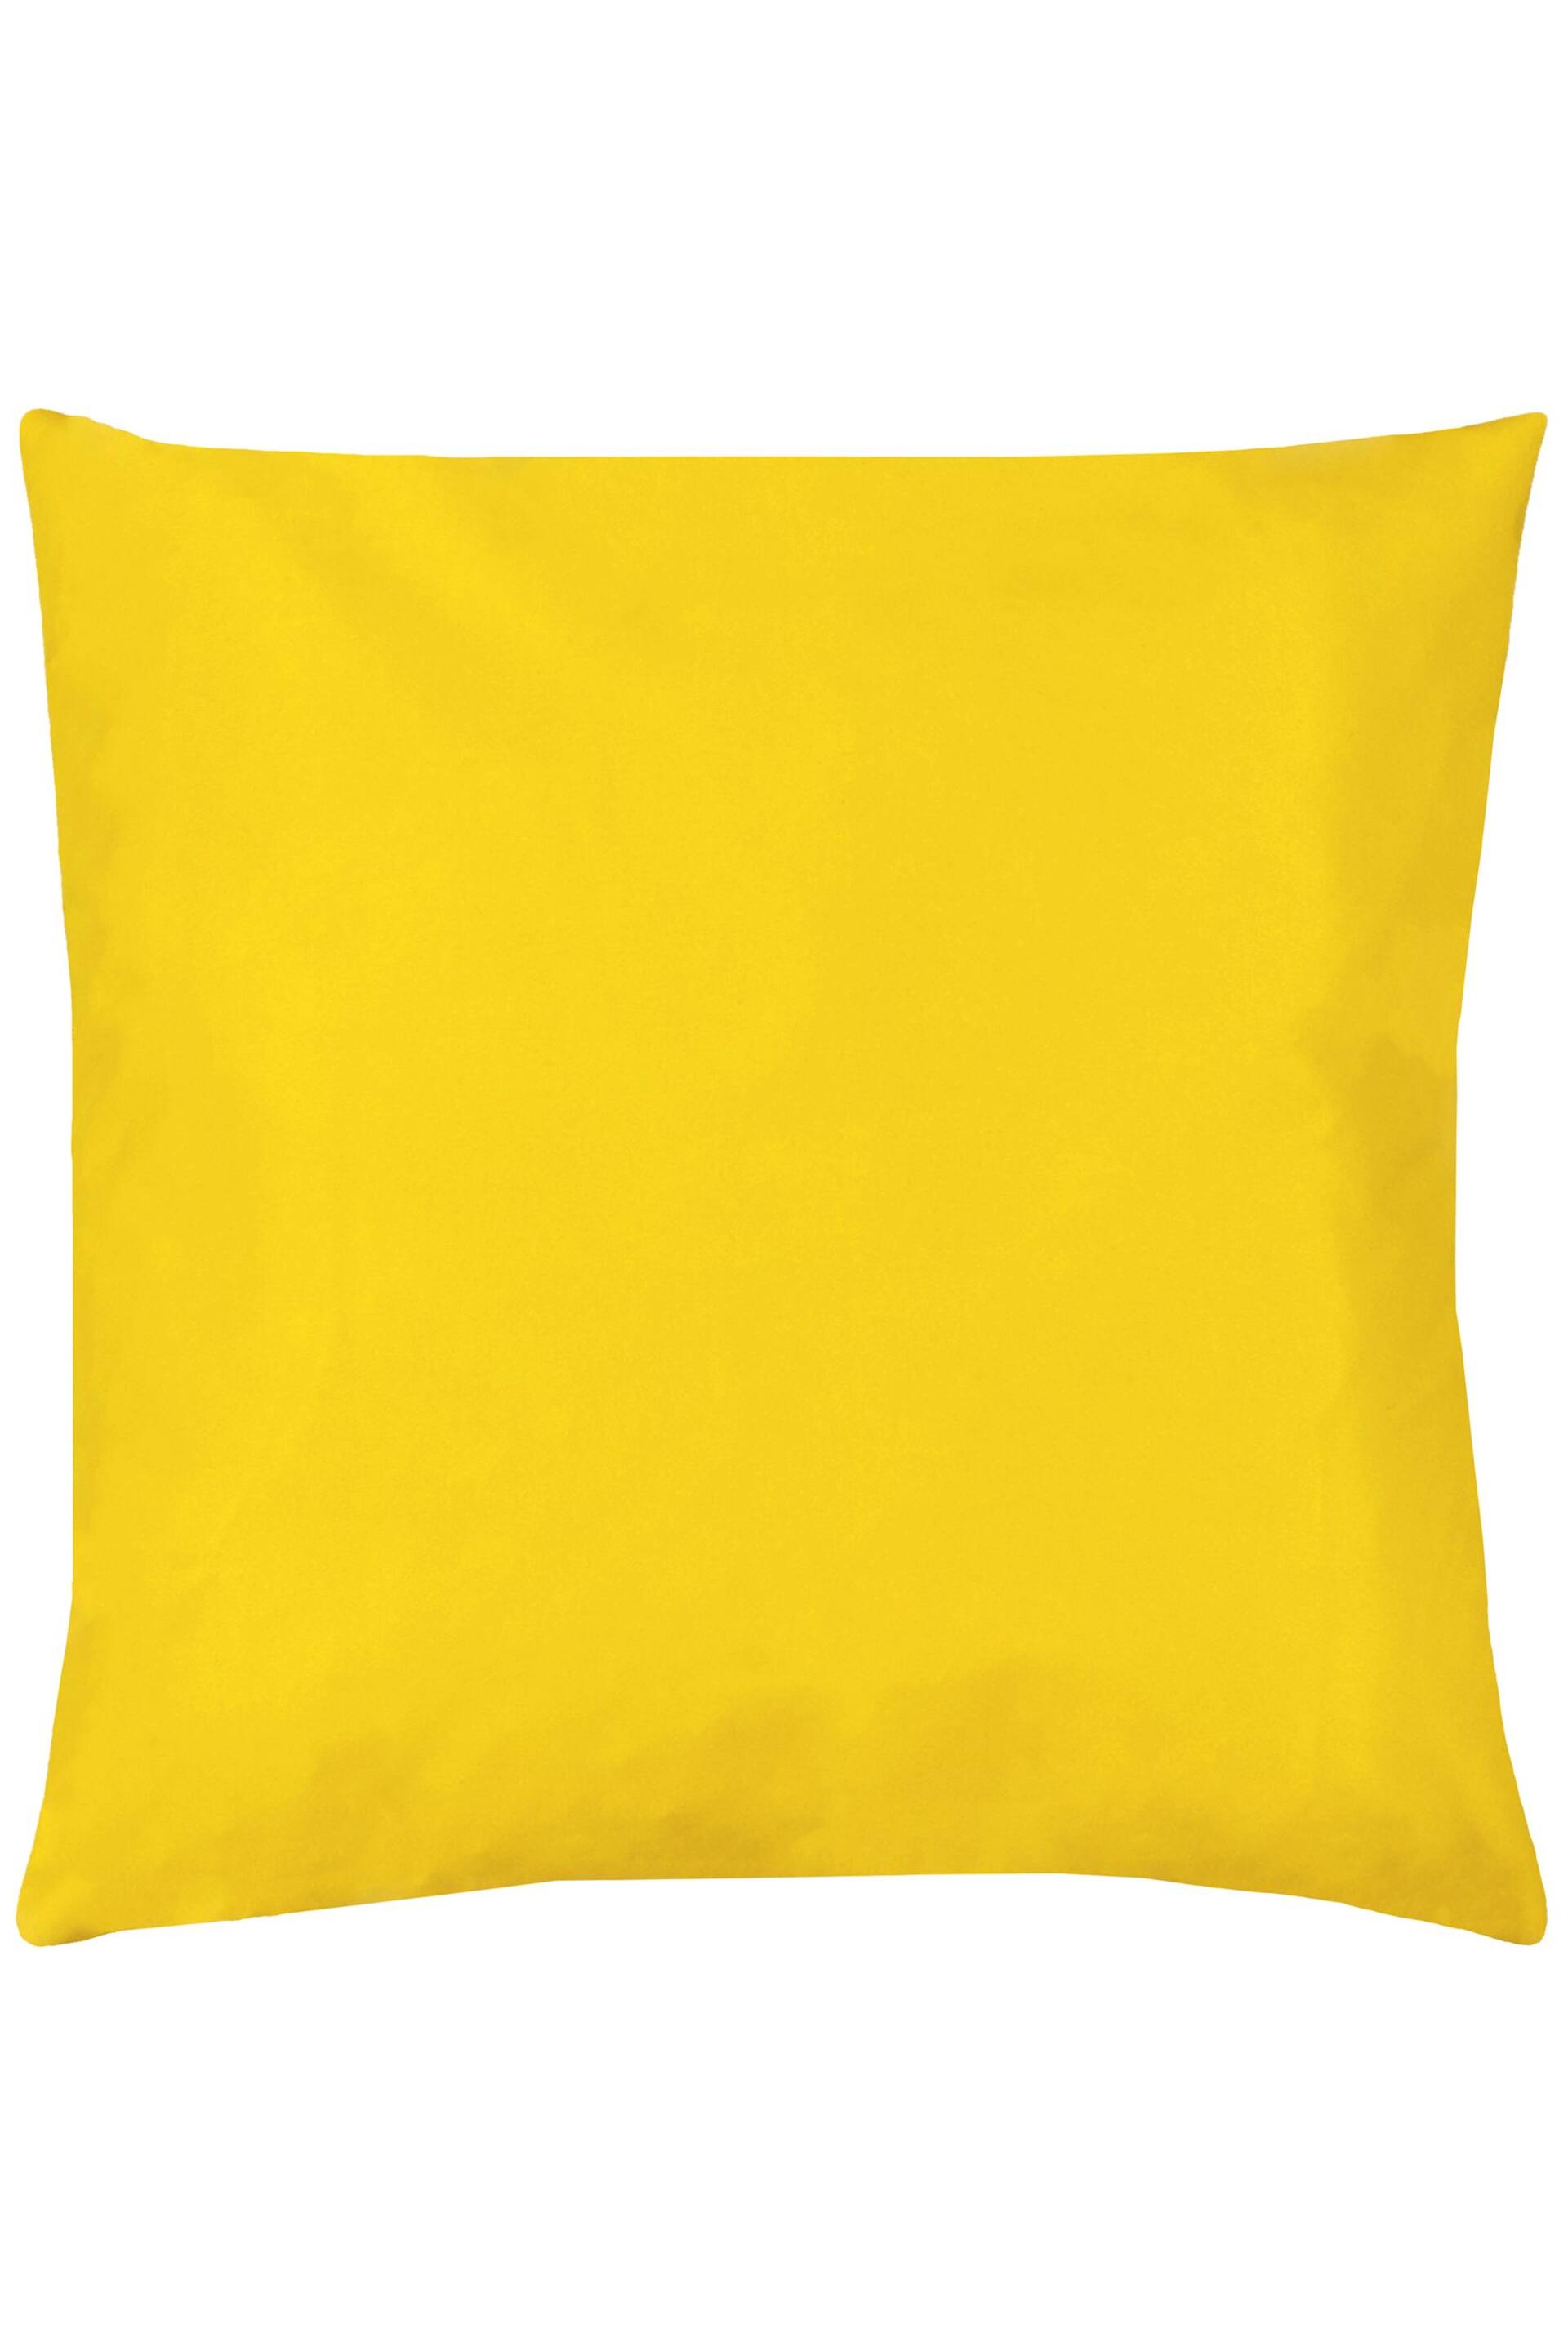 furn. Yellow Wrap Water & UV Resistant Outdoor Cushion - Image 1 of 2